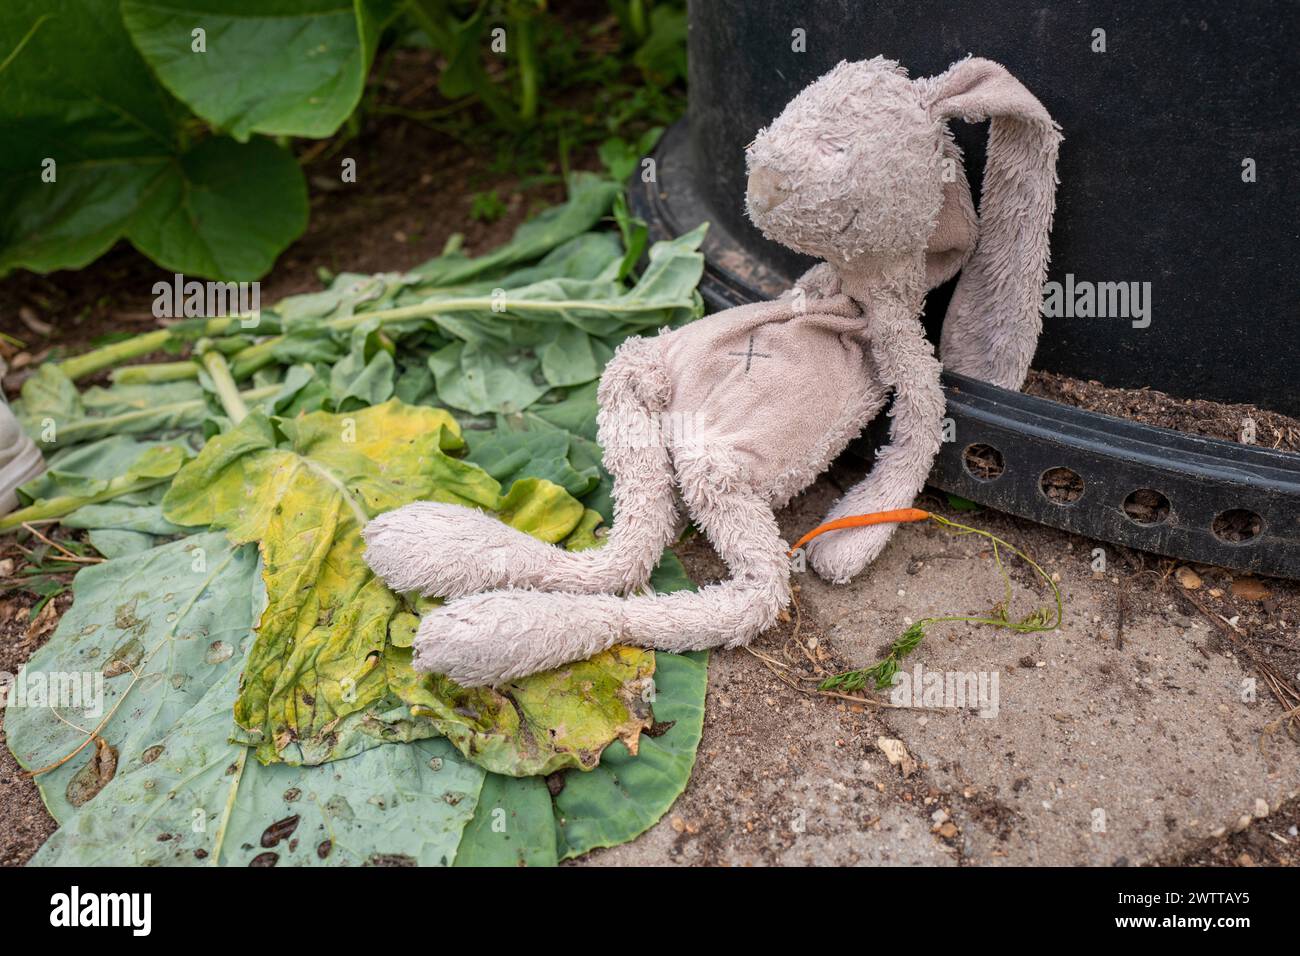 A lonely stuffed bunny slumped on the ground beside a wilting leaf. Stock Photo